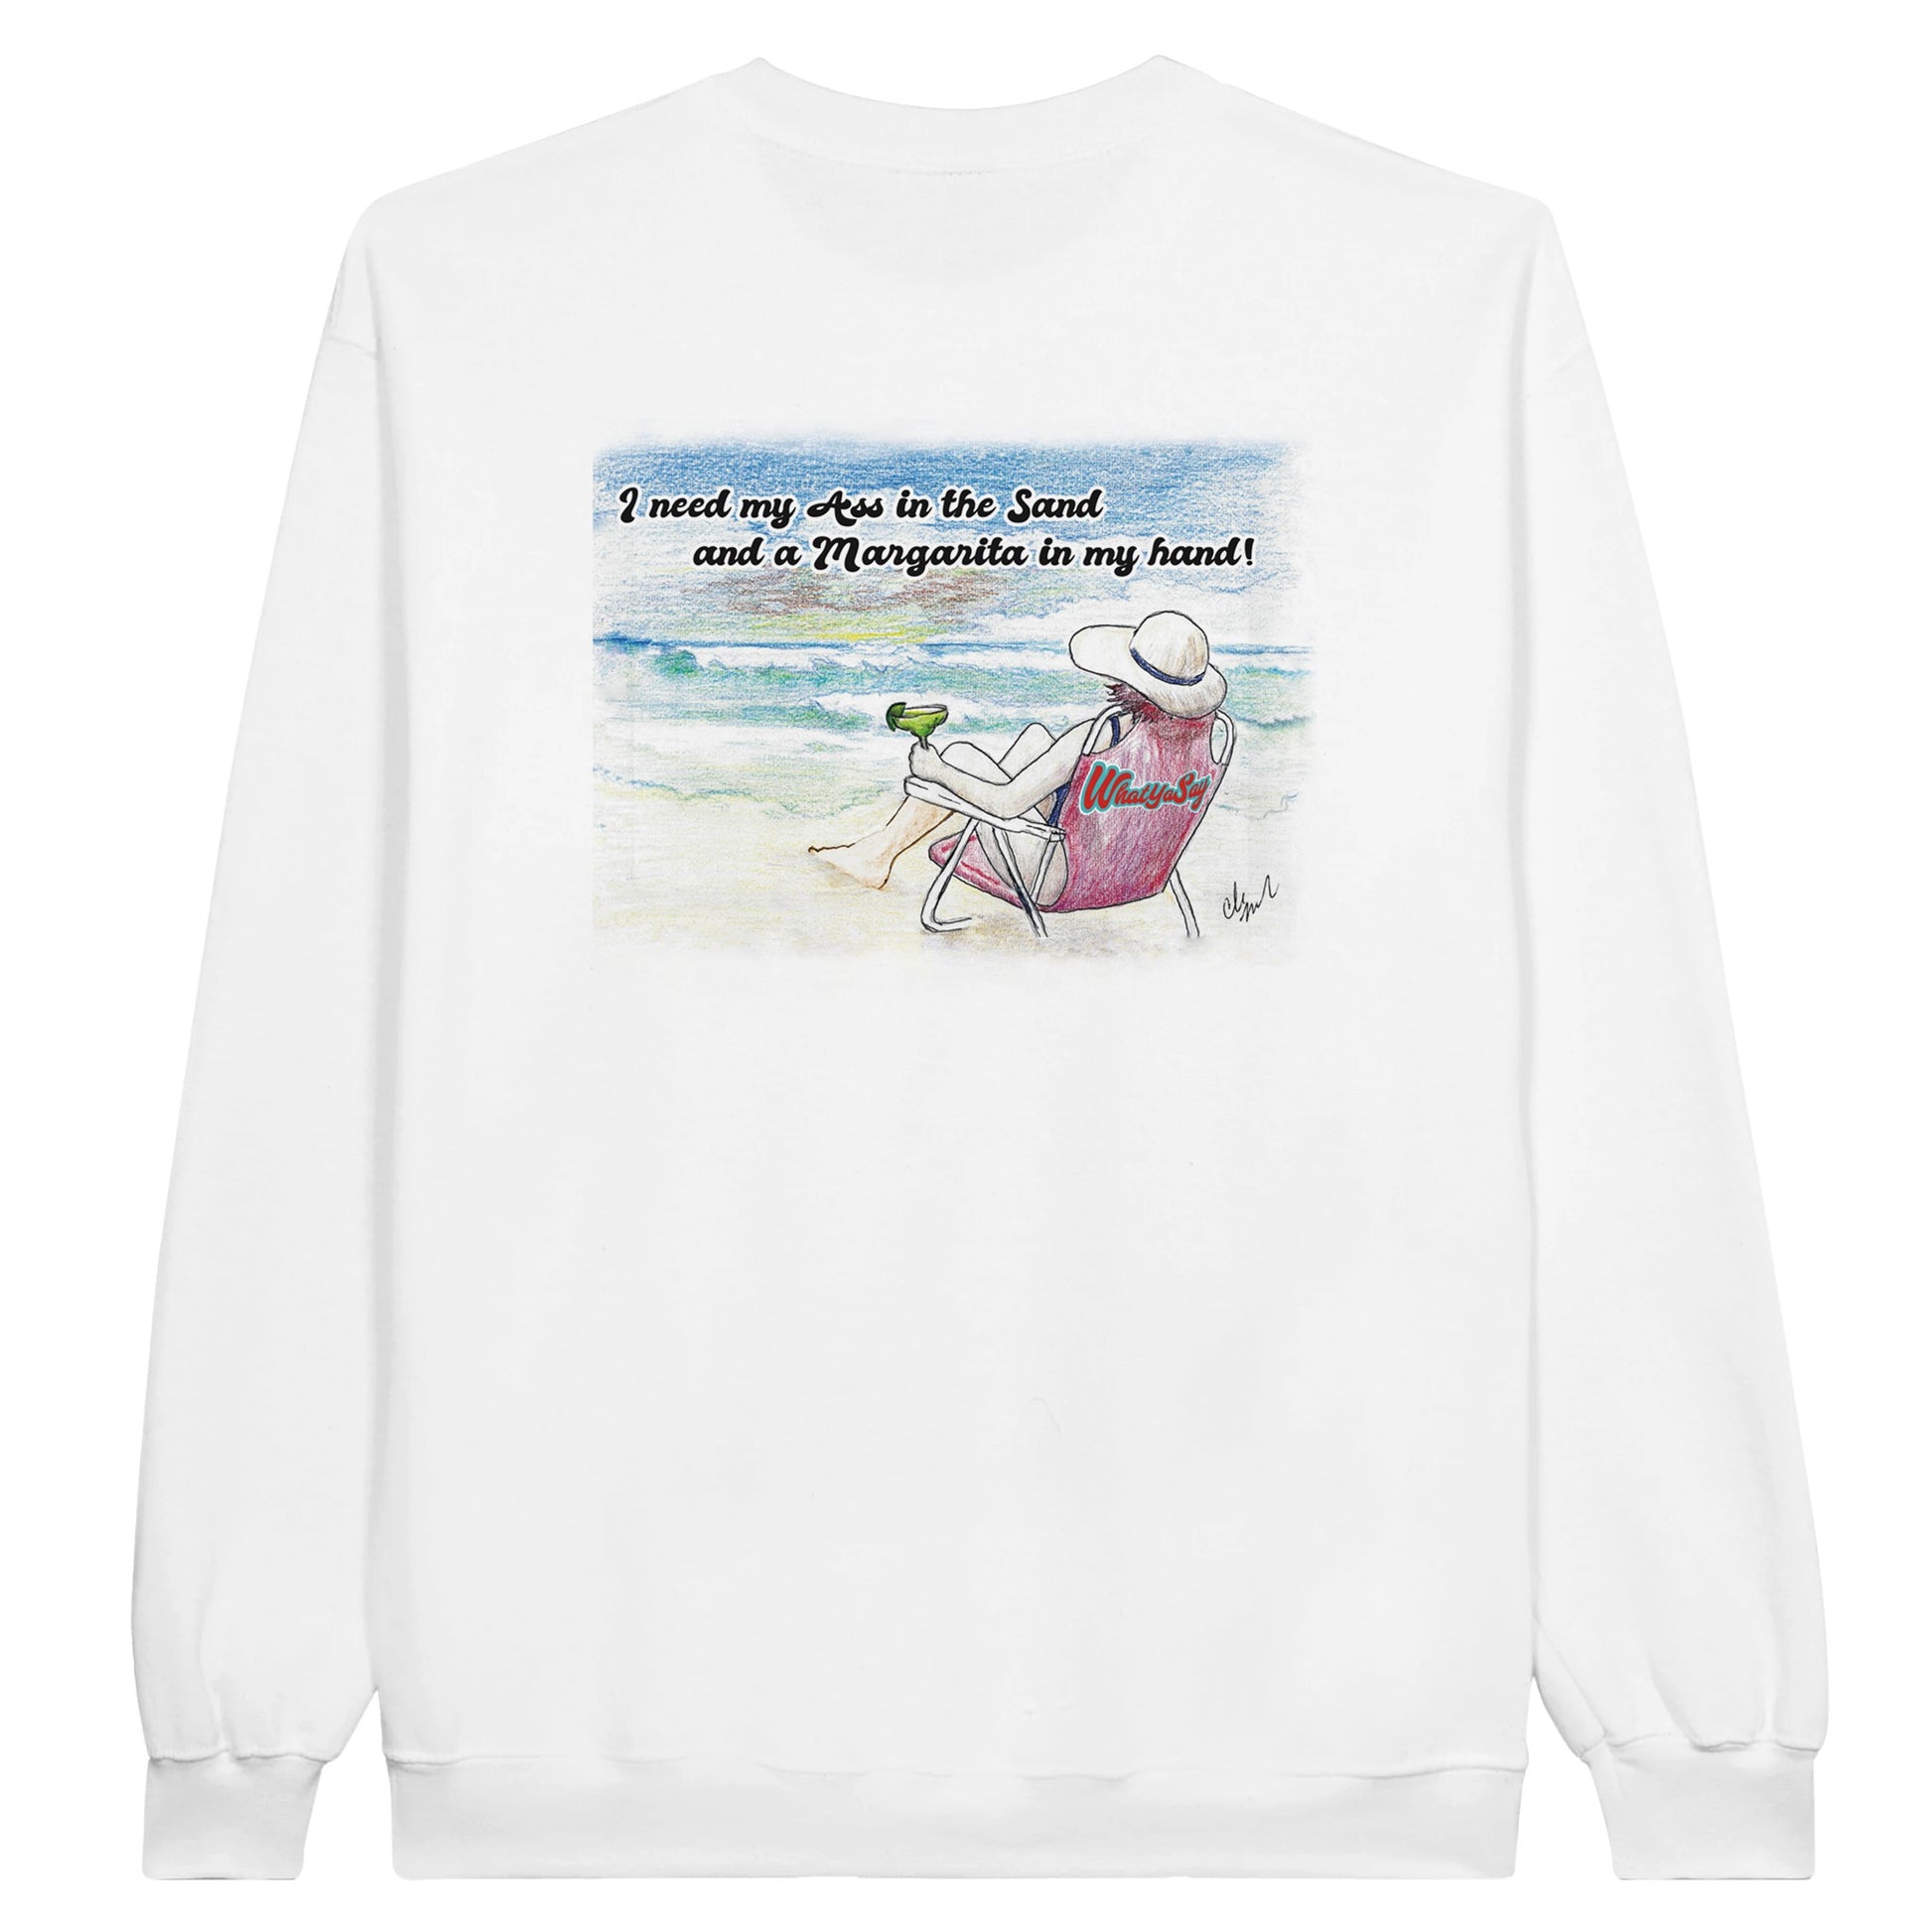 White Classic Unisex Crewneck sweatshirt with original artwork and motto I need my Ass in the Sand and a Margarita in my Hand on back and Whatya Say logo on front from WhatYa Say Apparel rear view lying flat.